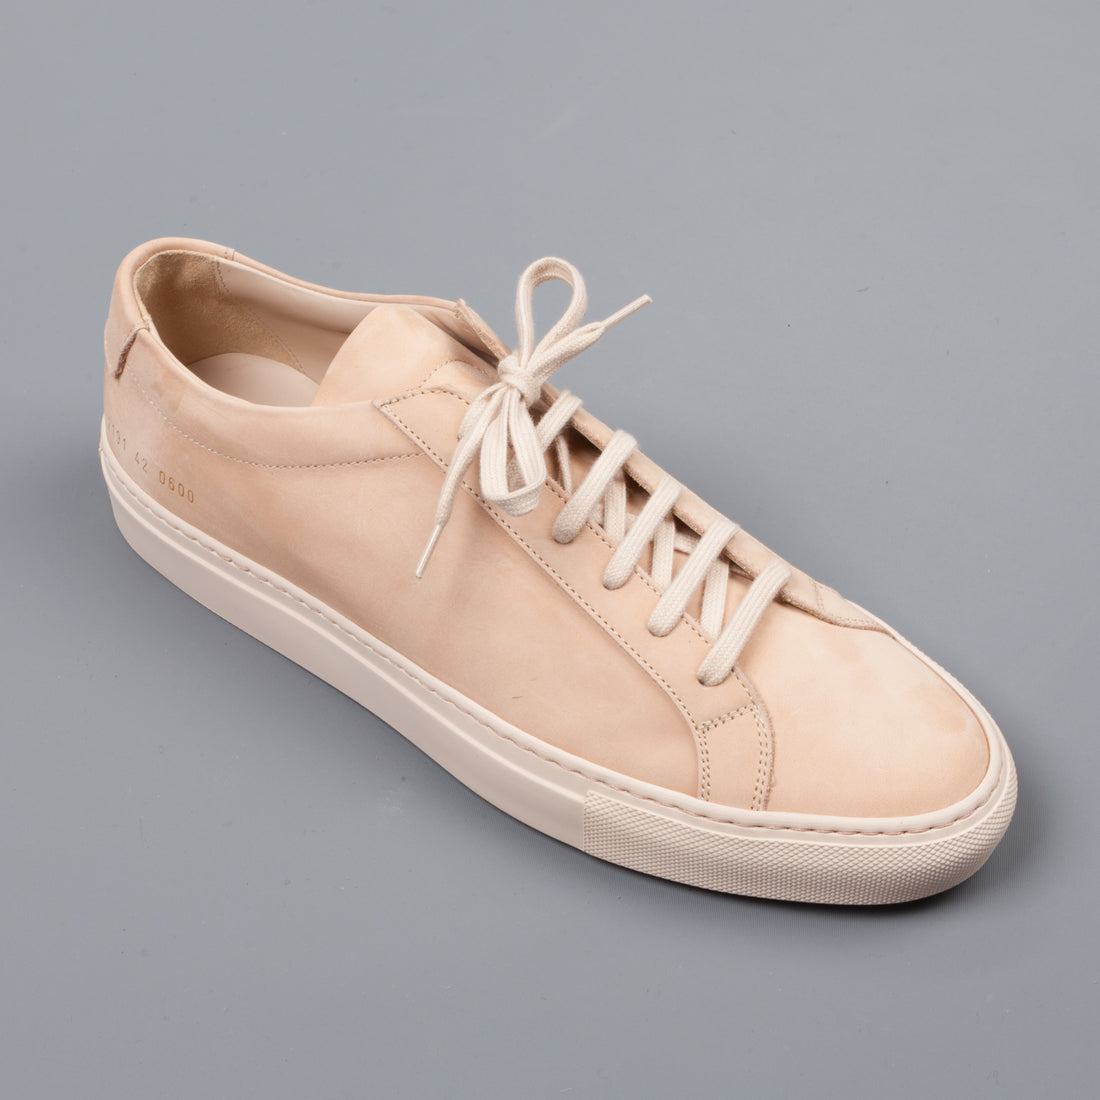 Common Projects Original Achilles Low Nabuck Nude